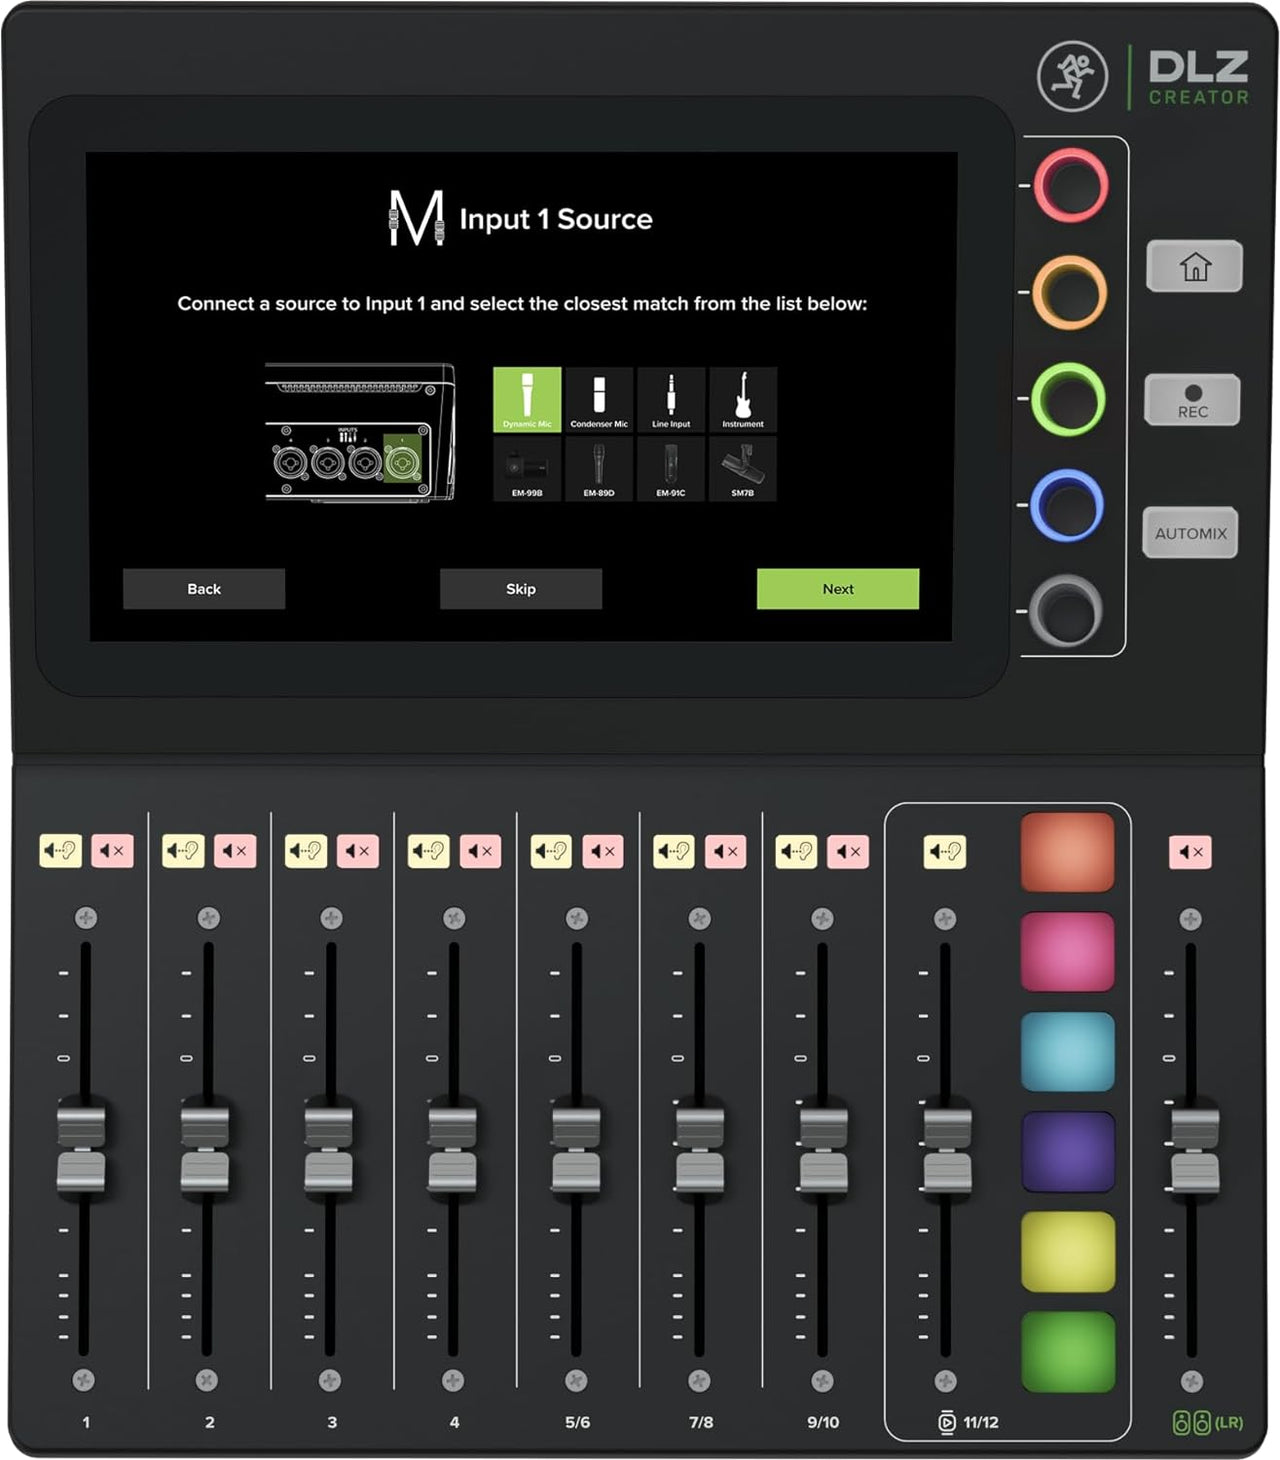 Mackie DLZ Creator Adaptive Digital Mixer for Podcasting, Streaming and YouTube with User Modes, Mix Agent Technology, Auto Mix, Onyx80 Mic Preamps